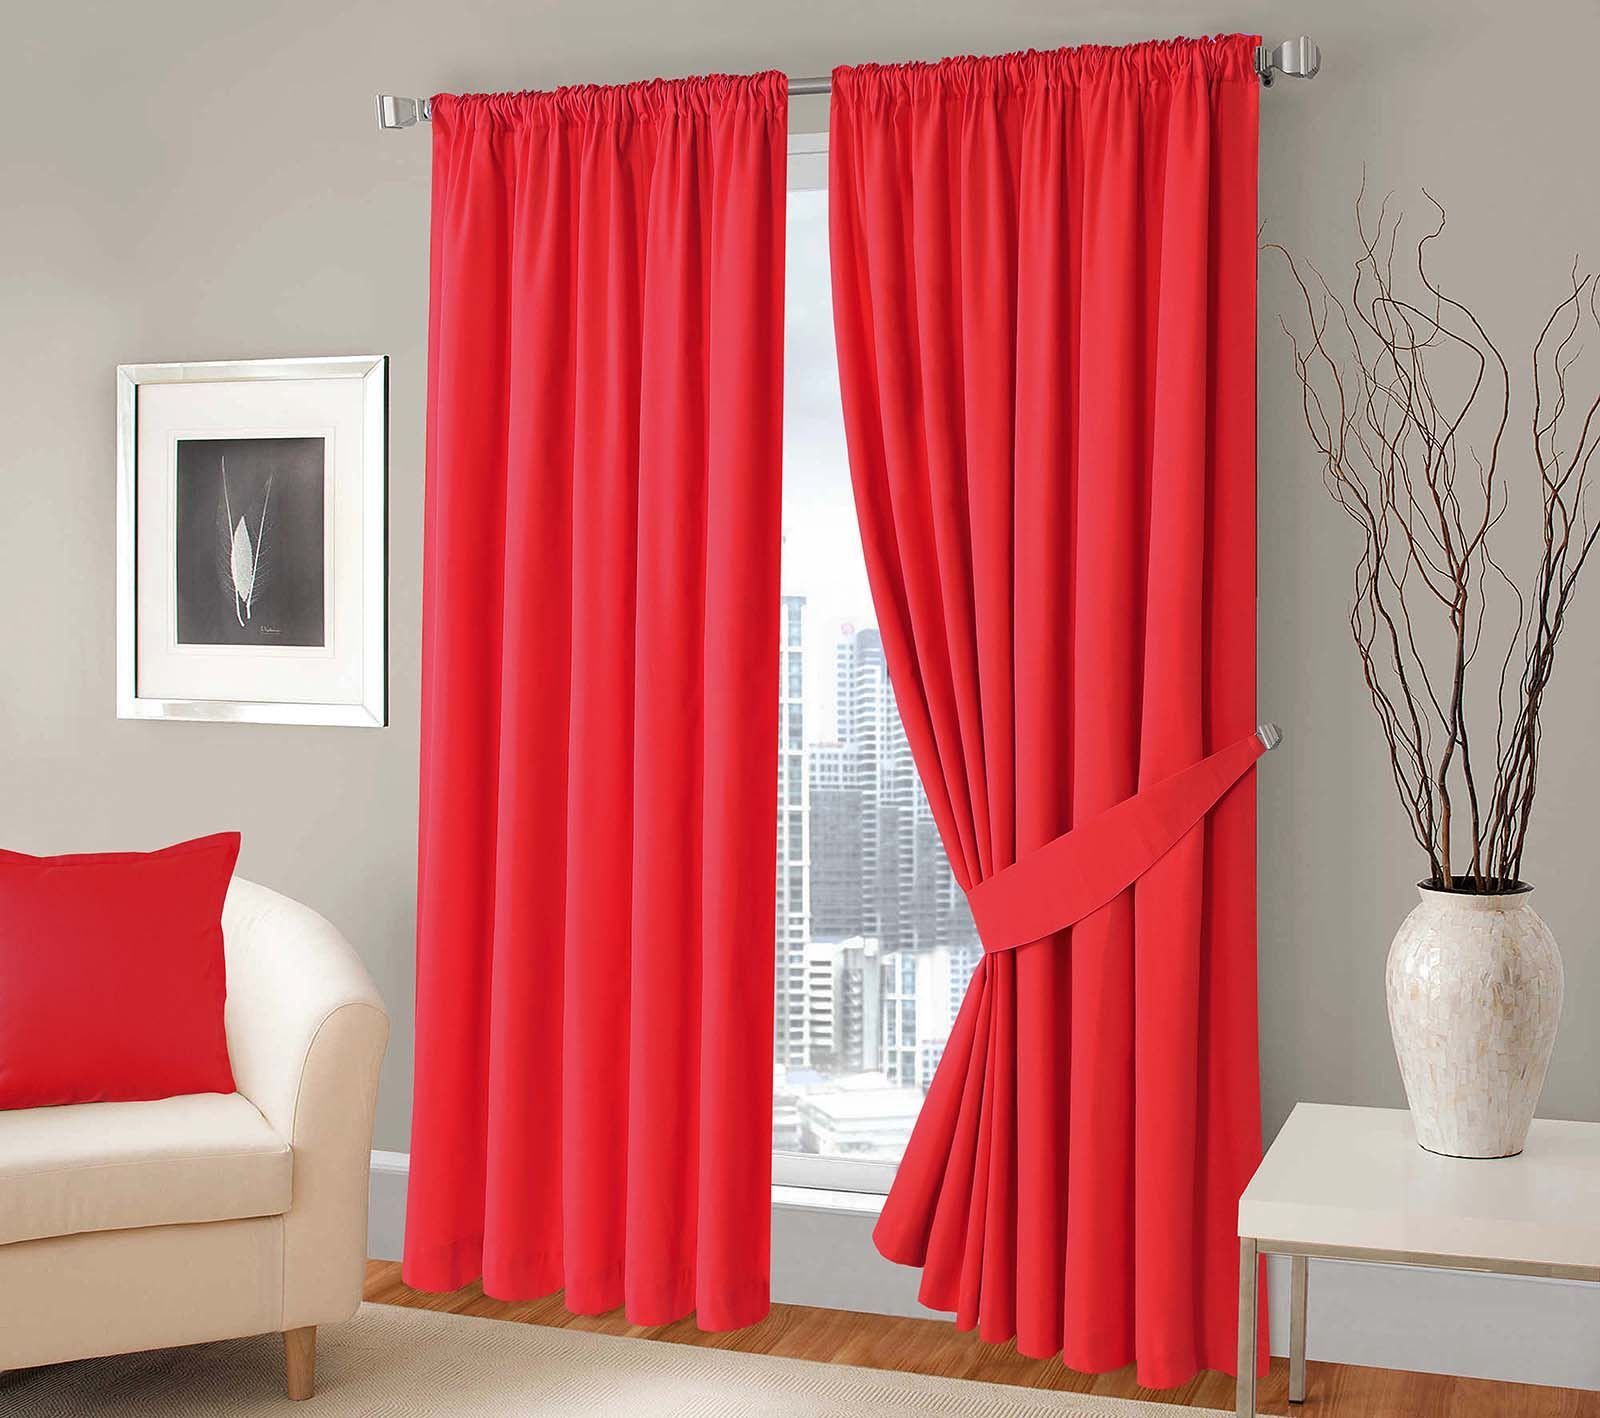 Luxury Panama Ready Made Pencil Pleated Curtains Pair Solid Intended For Solid Cotton Pleated Curtains (View 5 of 30)